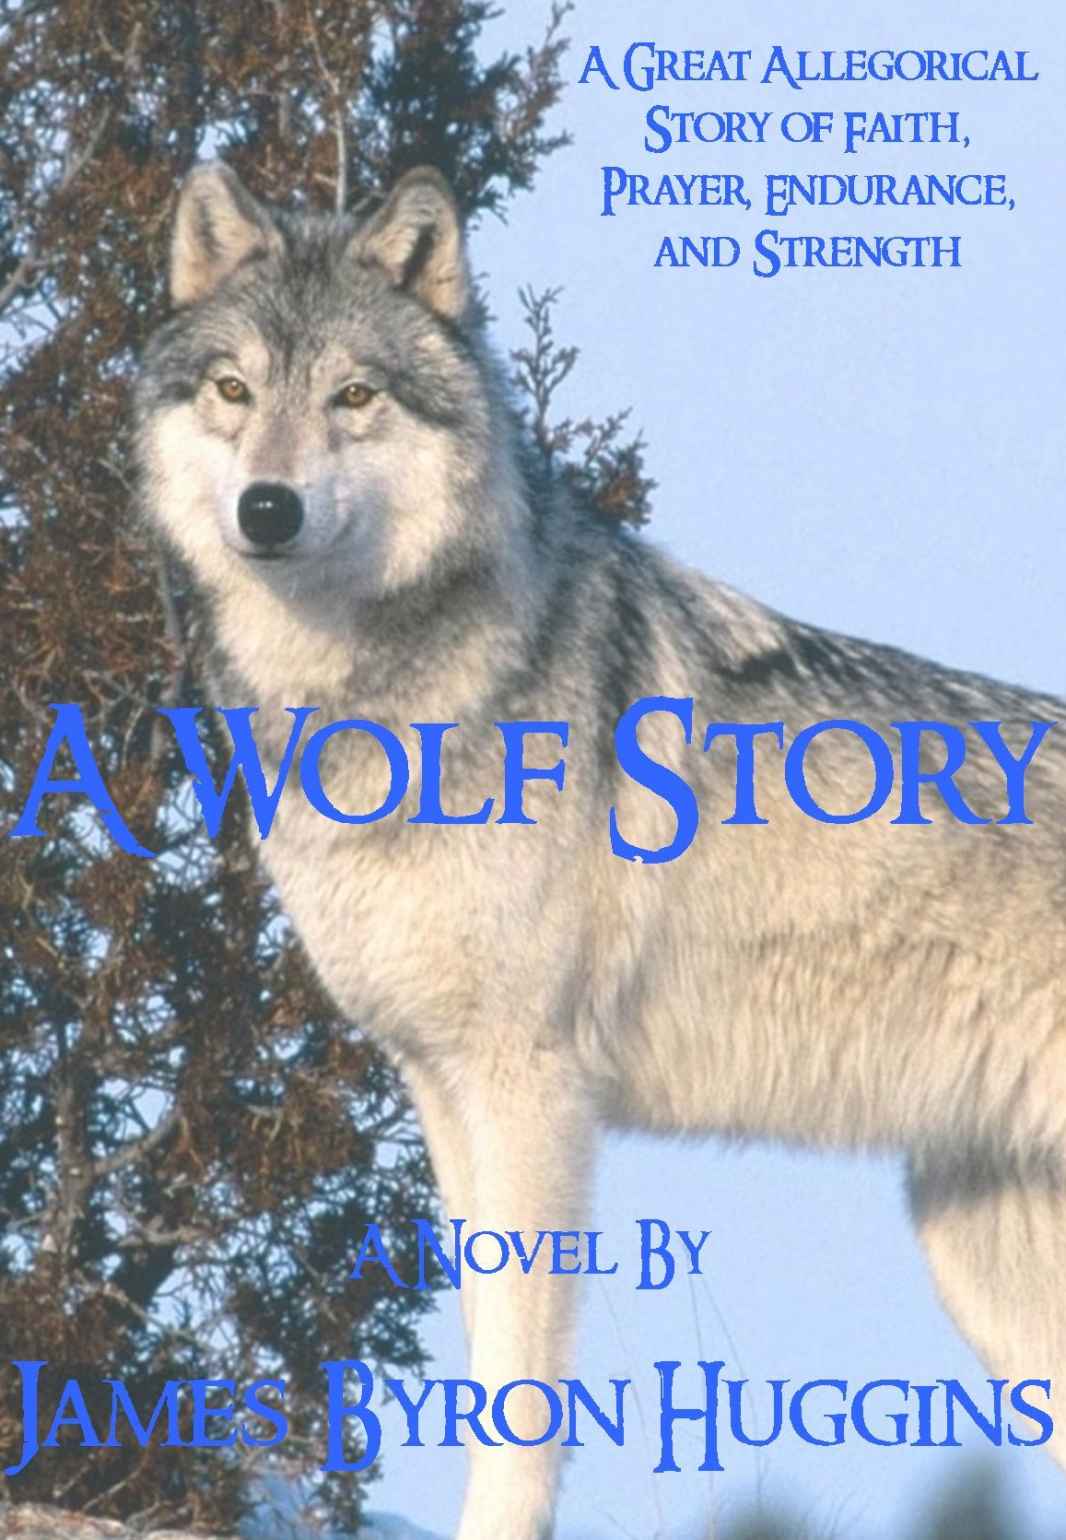 Read A Wolf Story by Huggins, James Byron online free full book. China ...